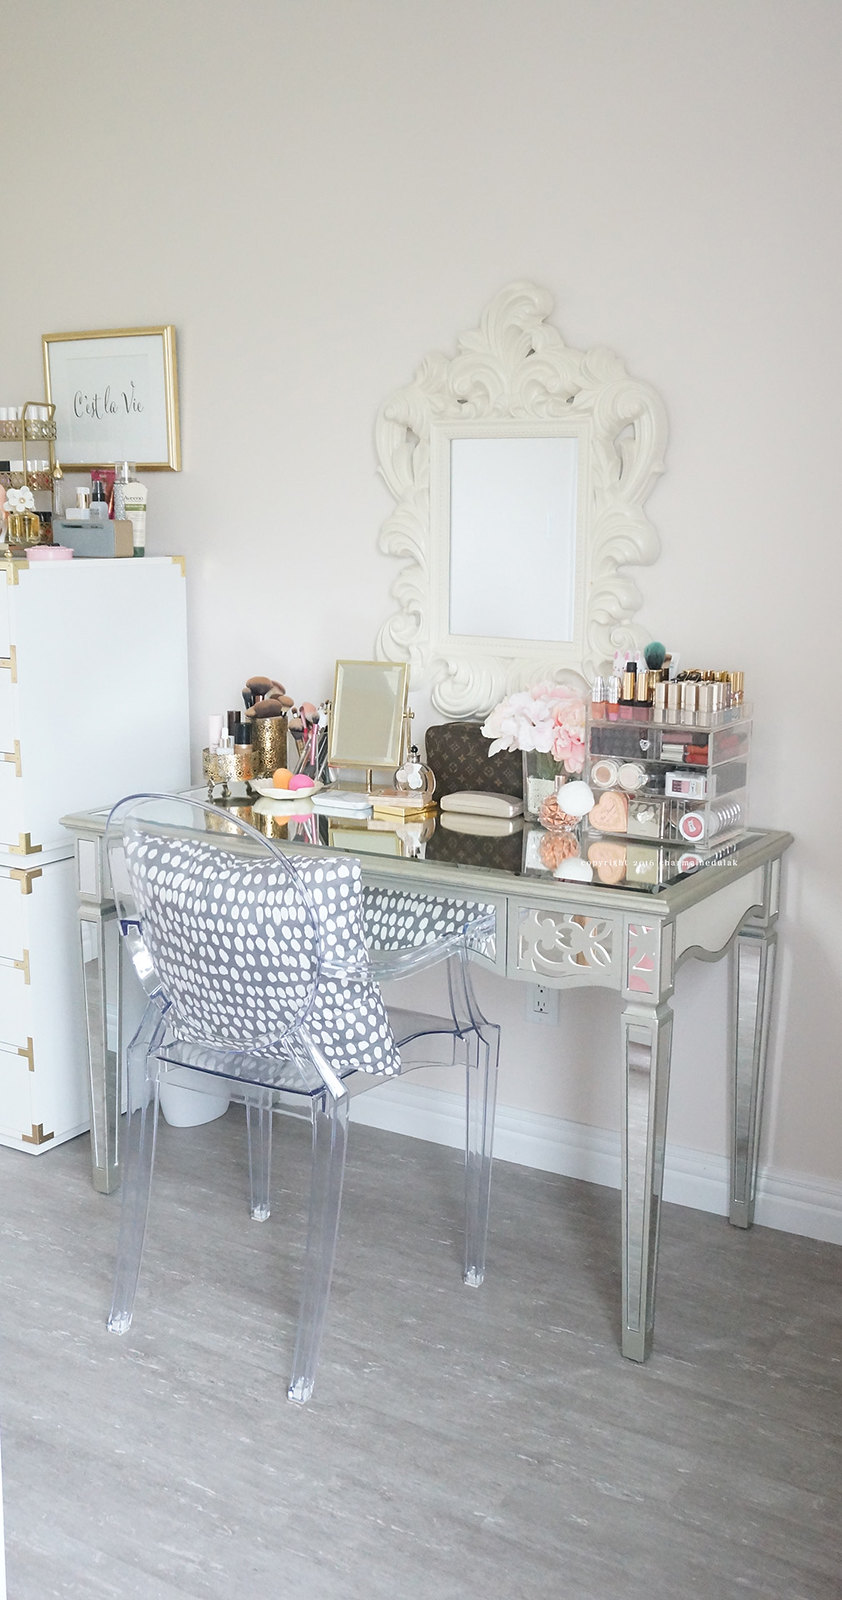 Beauty Room & Office Room Tour